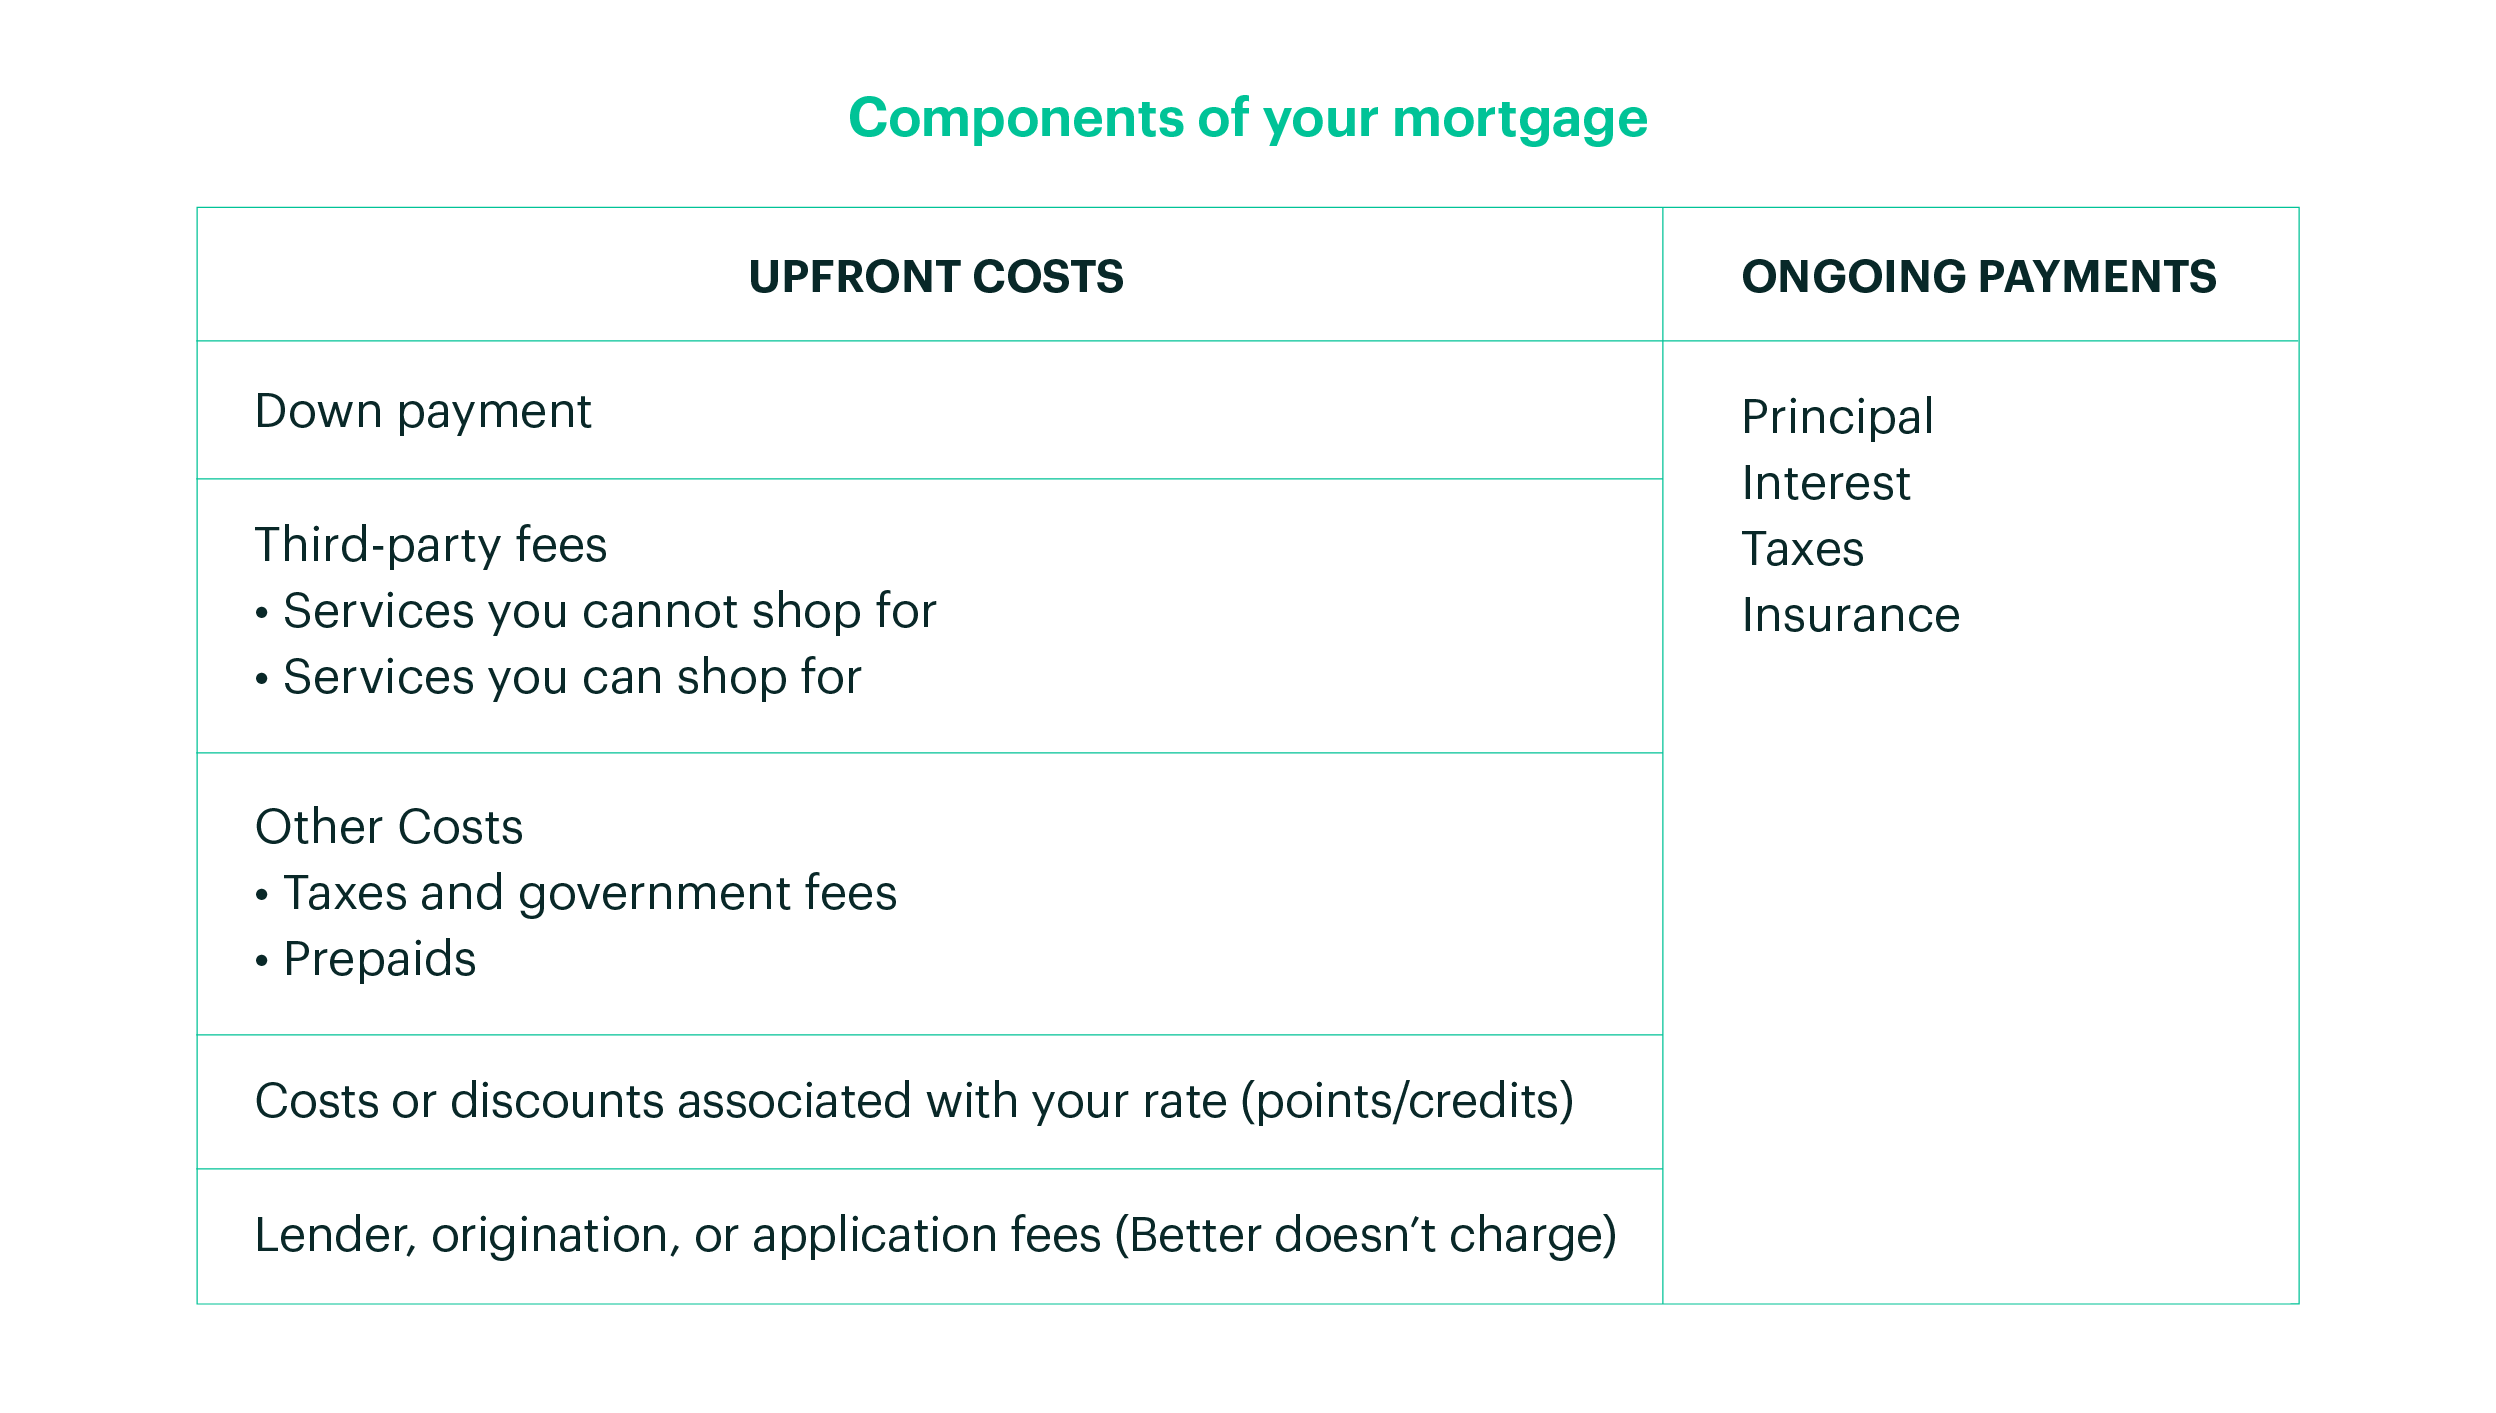  Table: Components of Your Mortgage